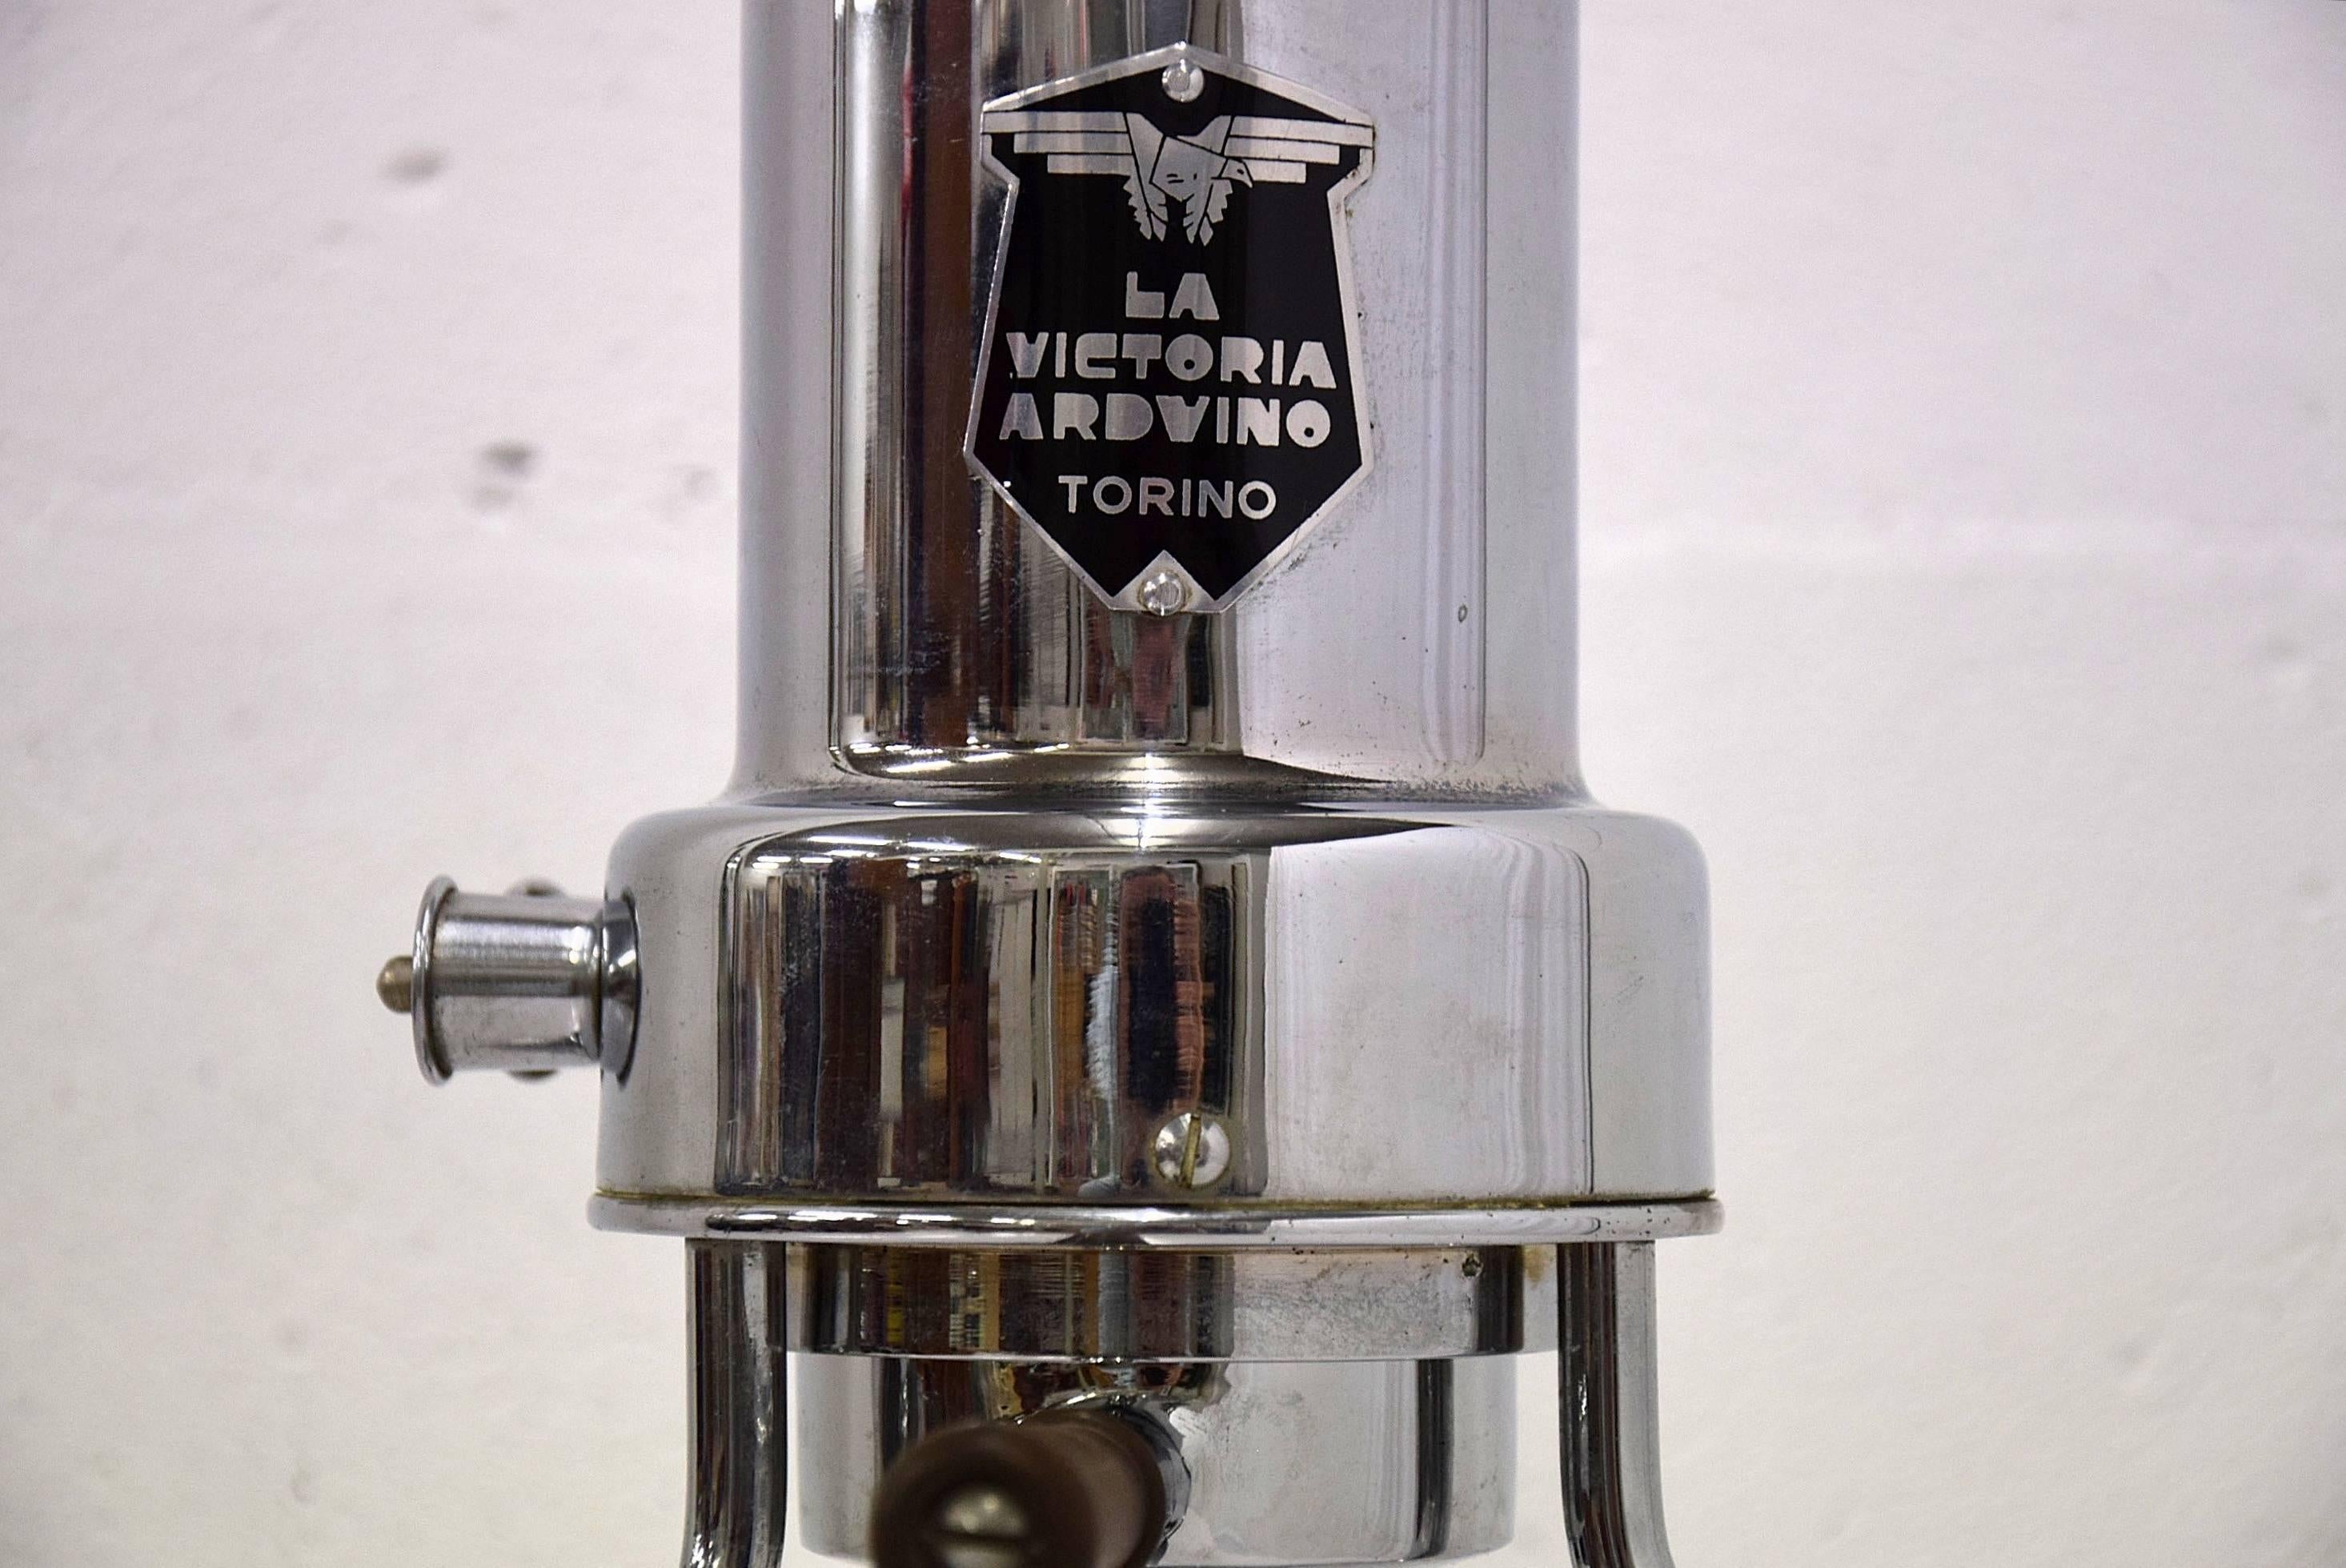 Rare late 1930s La Victoria Arduino espresso machine for home use.

As you can see in the images is this impressive after nearly 80 years in fantastic condition.

It comes without the filter and it's power cable so I recommend it as show piece